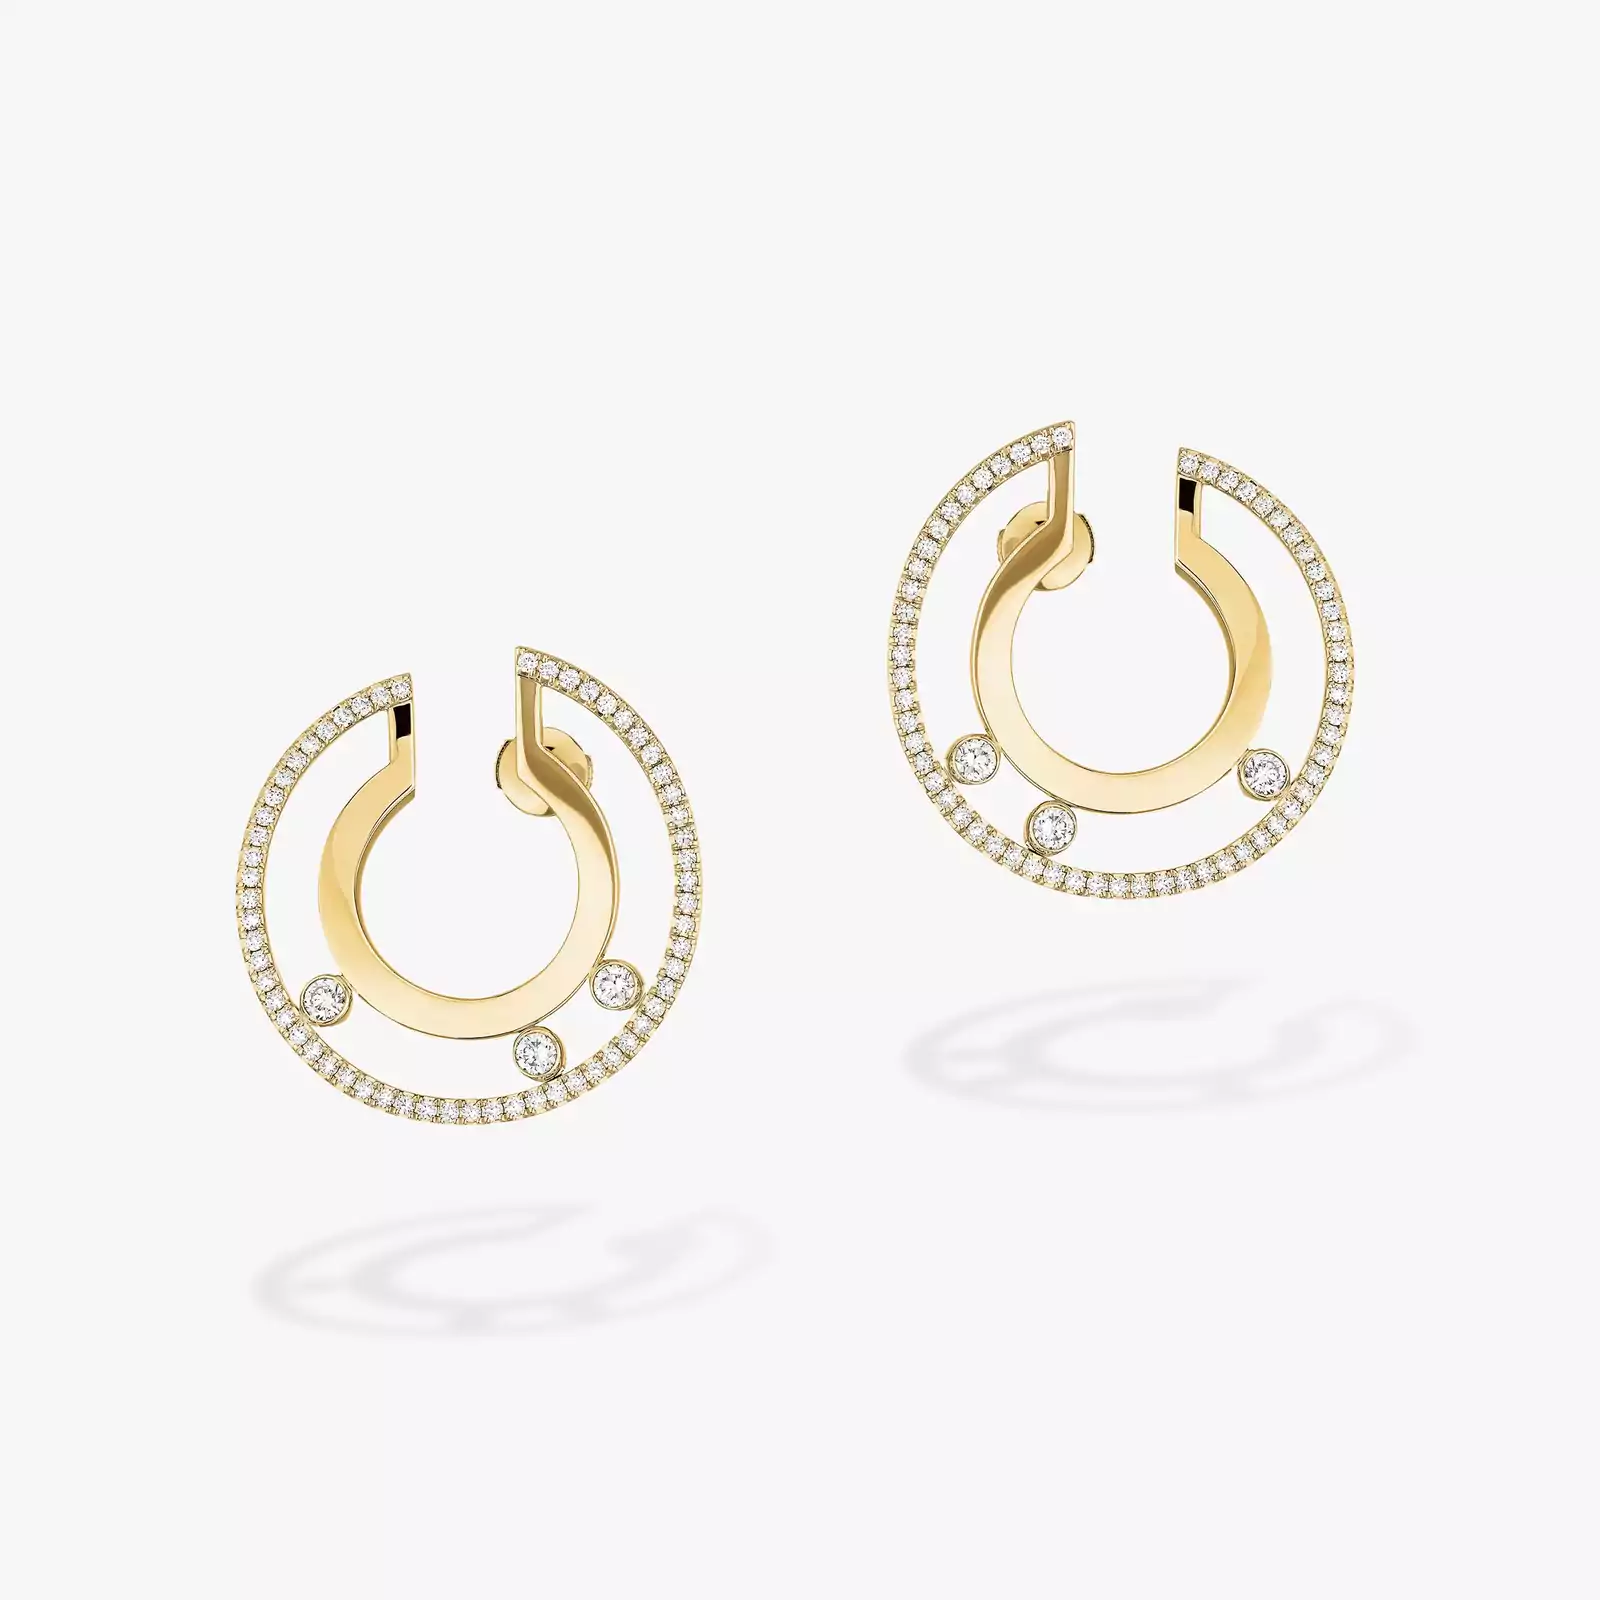 Move Romane Small Hoop Yellow Gold For Her Diamond Earrings 06689-YG